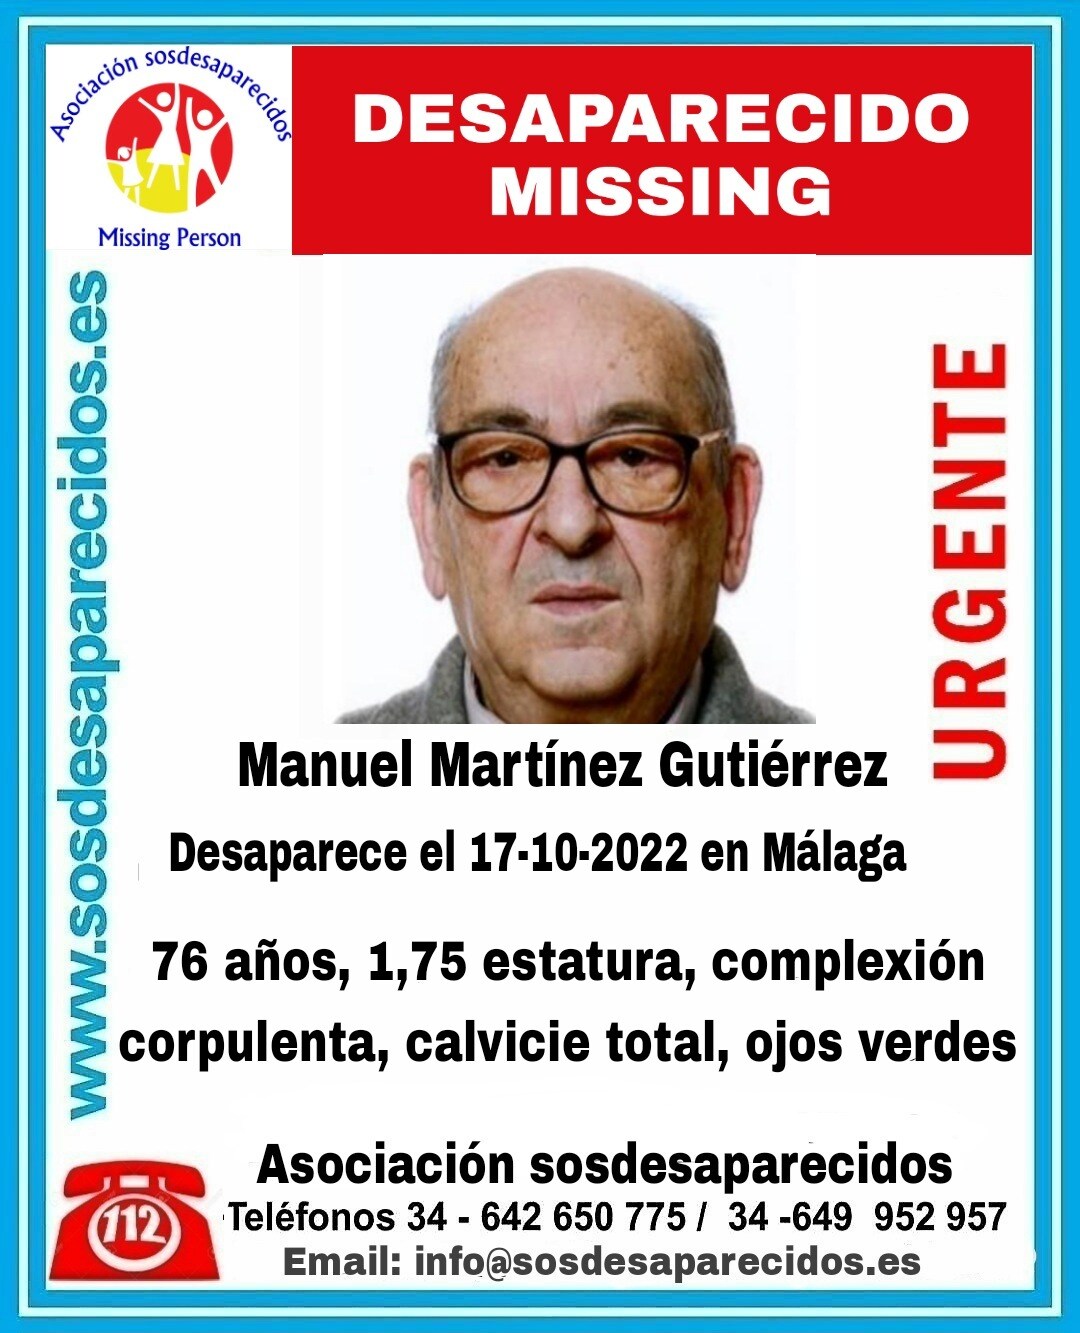 Urgent appeal for sightings of missing man in Malaga